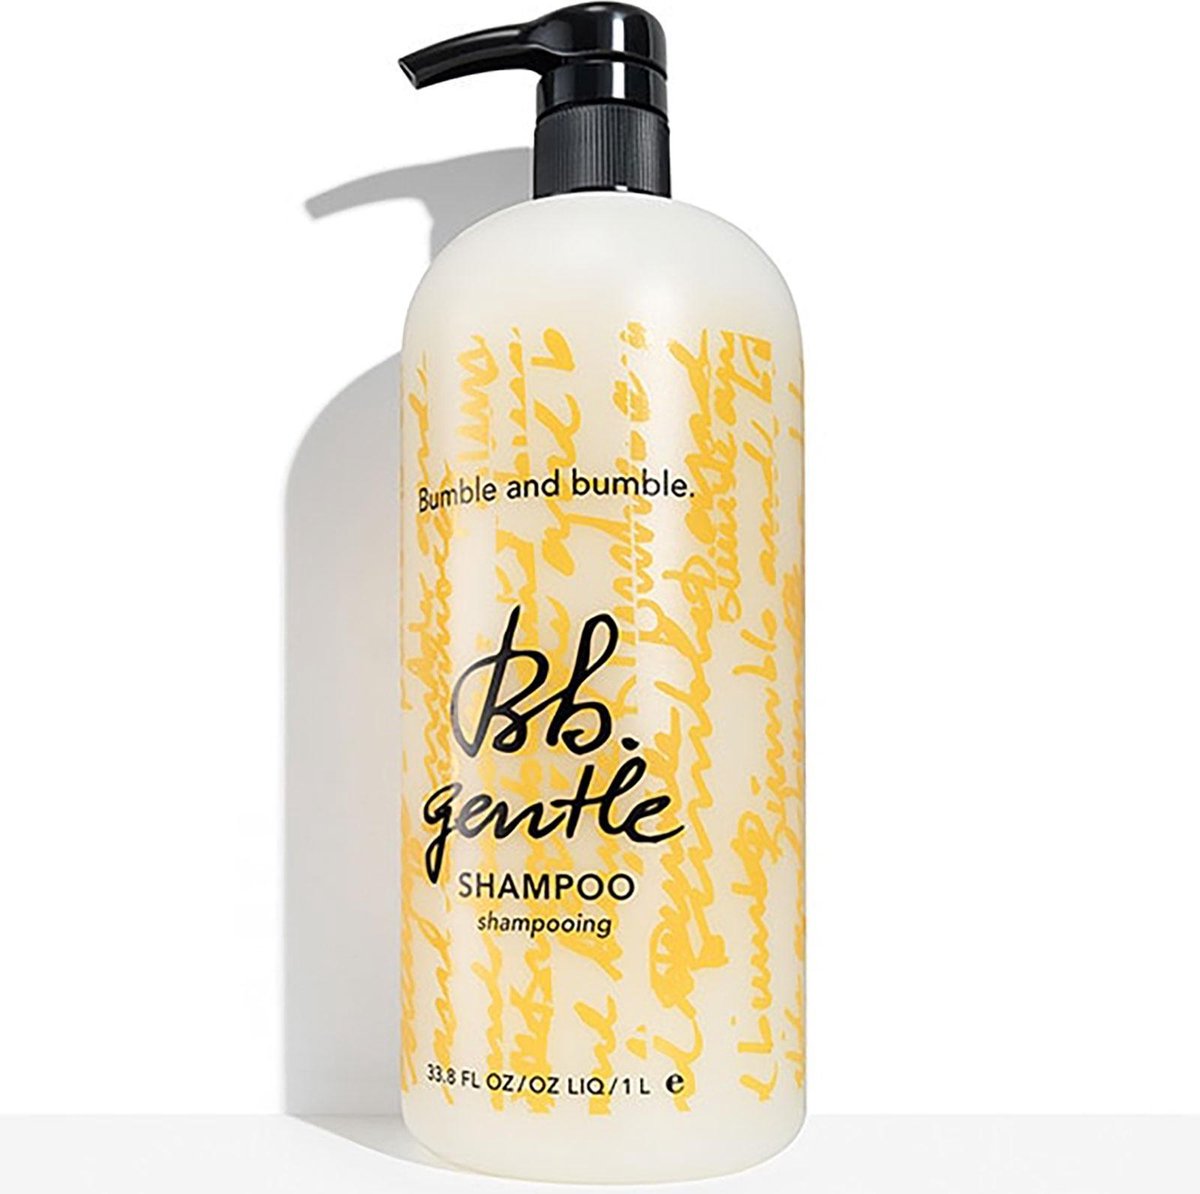 Bumble and bumble Gentle Shampoo-1000 ml - Normale shampoo vrouwen - Voor Alle haartypes